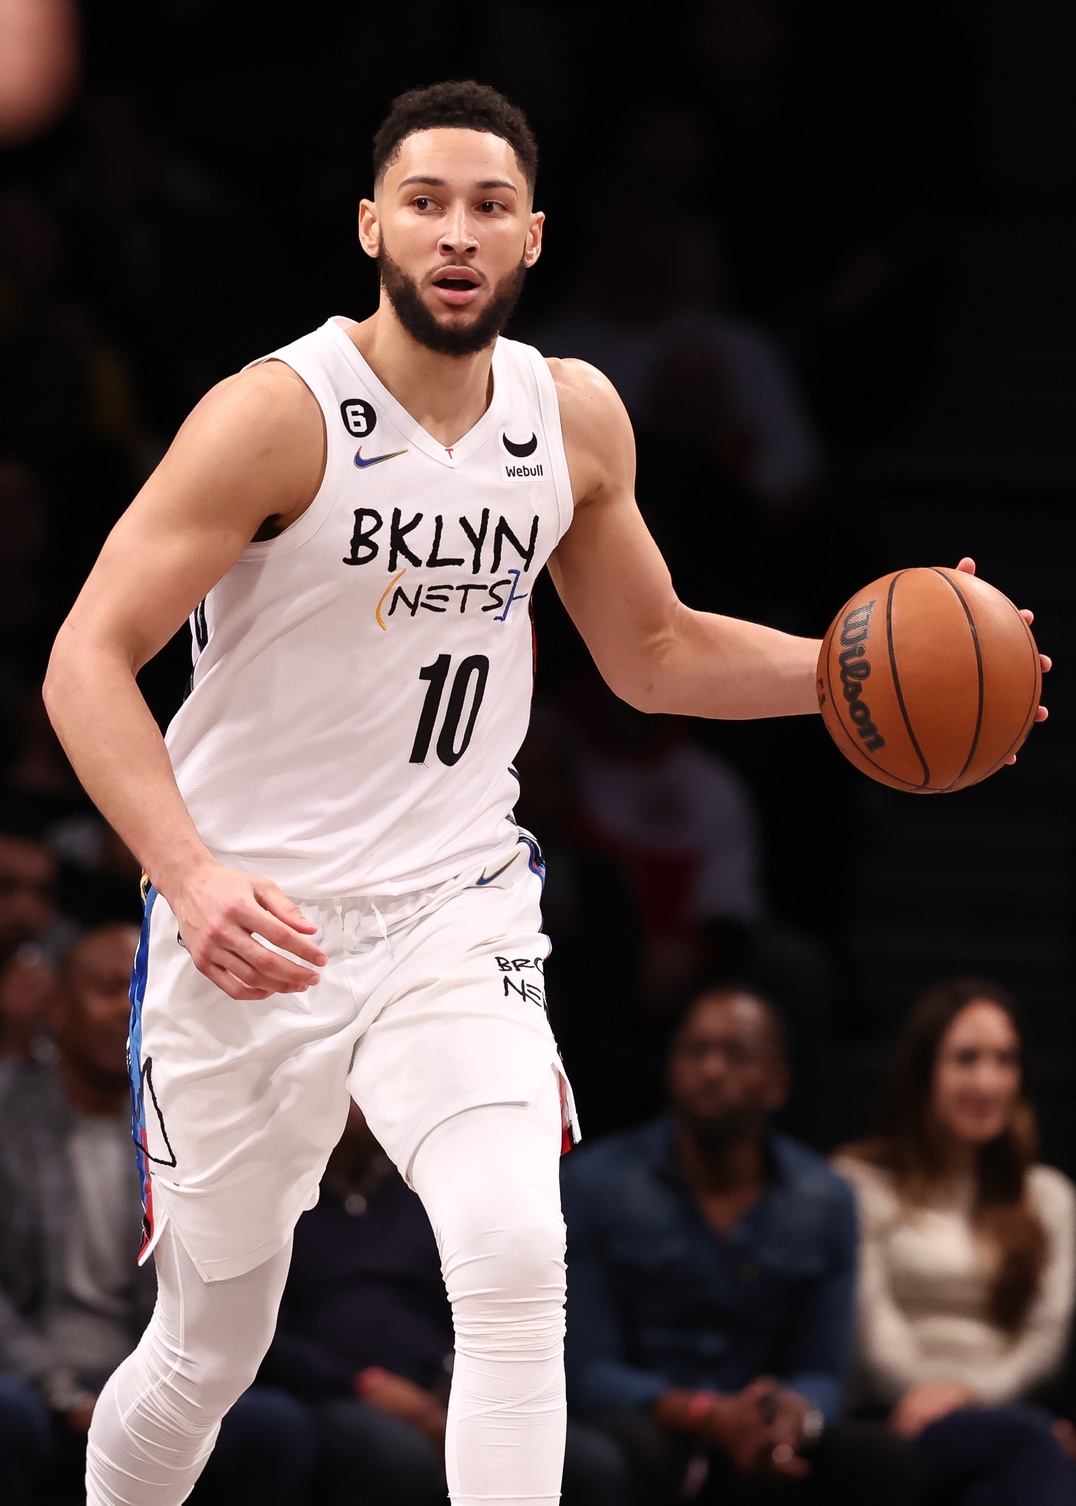 Feb 15, 2023; Brooklyn, New York, USA; Brooklyn Nets guard Ben Simmons (10) dribbles up court during the second half against the Miami Heat at Barclays Center. Mandatory Credit: Vincent Carchietta-USA TODAY Sports